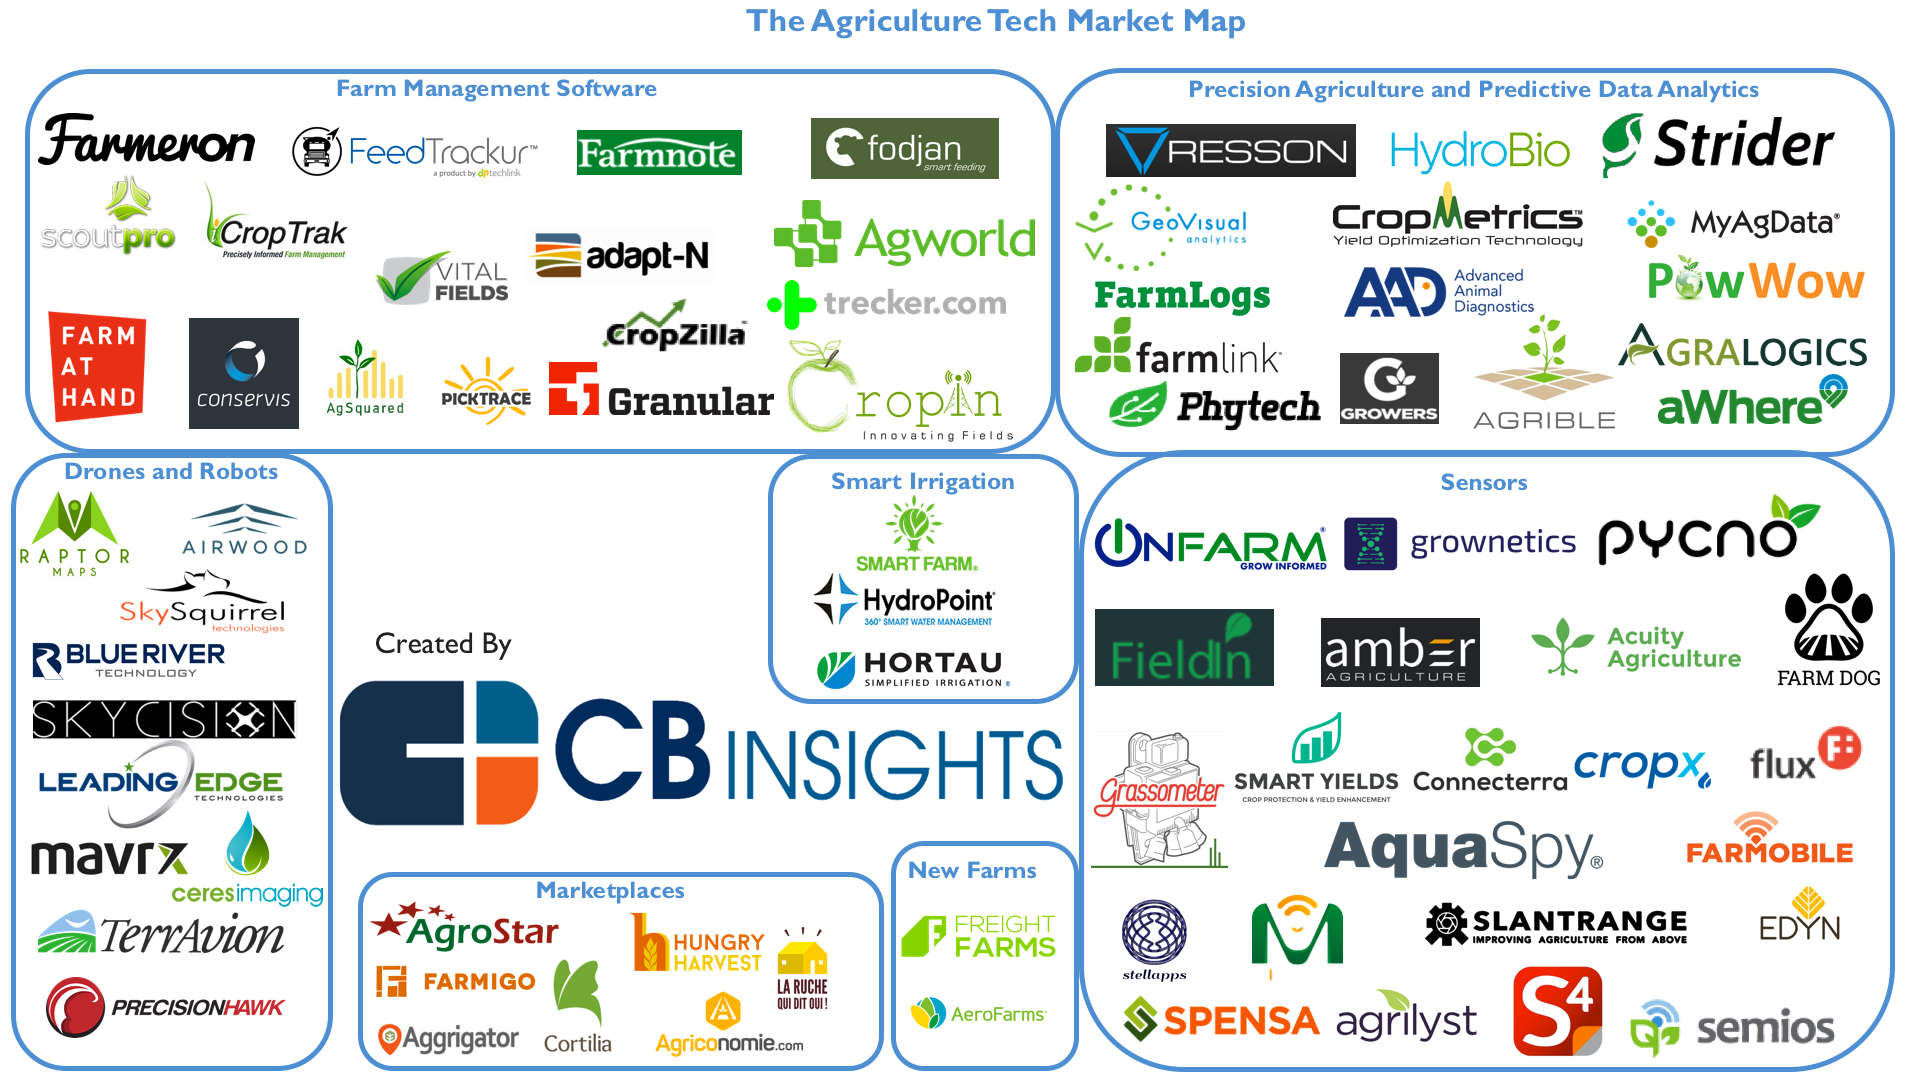 77 AgTech Startups Powering The Future Of Farming And Agribusiness